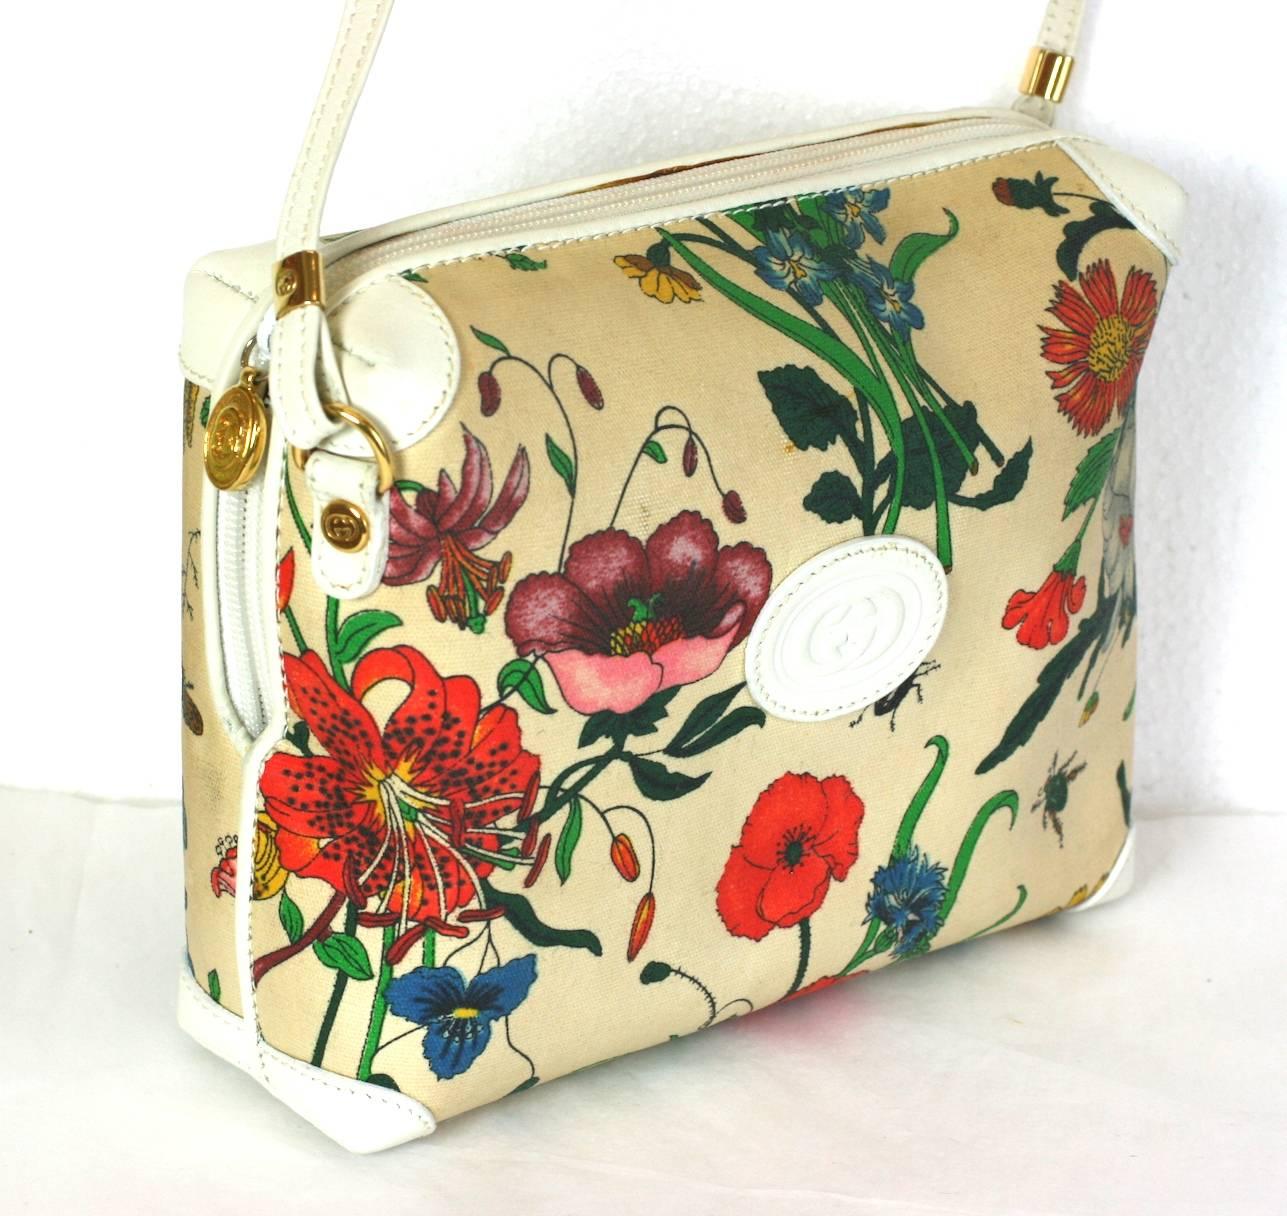 Charming Gucci Floral Print Bag with white leather trim. Signature print of florals and bugs from the 1980's. Resinated canvas. Very Good Condition. 
7.5" x 6" high x 2.5" wide. 
Strap 48